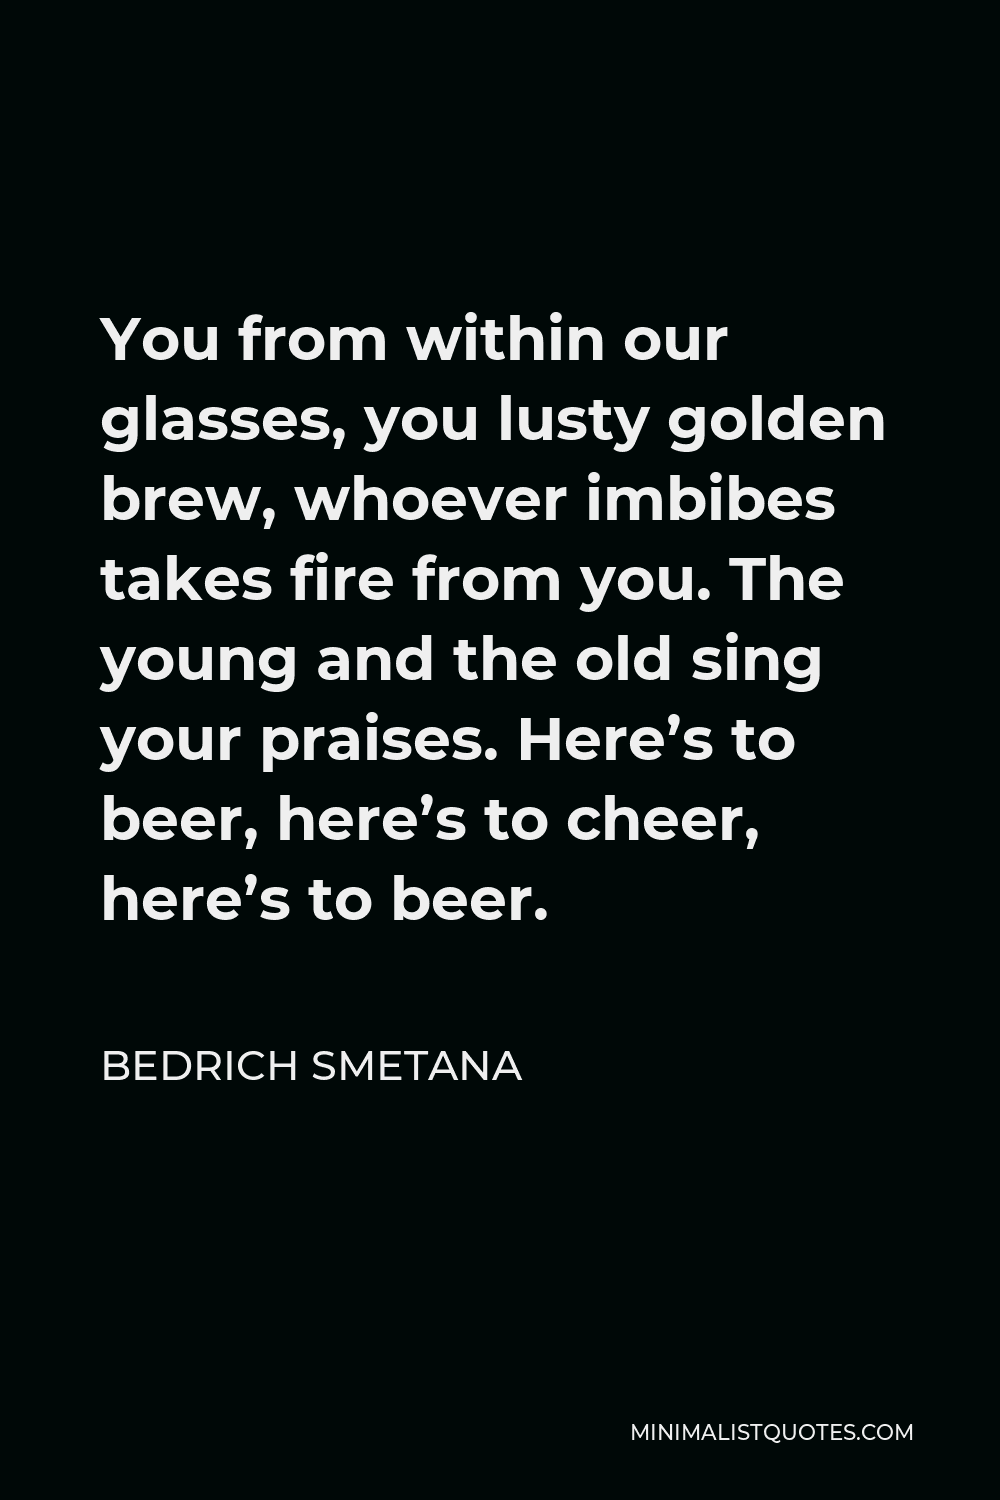 Bedrich Smetana Quote - You from within our glasses, you lusty golden brew, whoever imbibes takes fire from you. The young and the old sing your praises. Here’s to beer, here’s to cheer, here’s to beer.